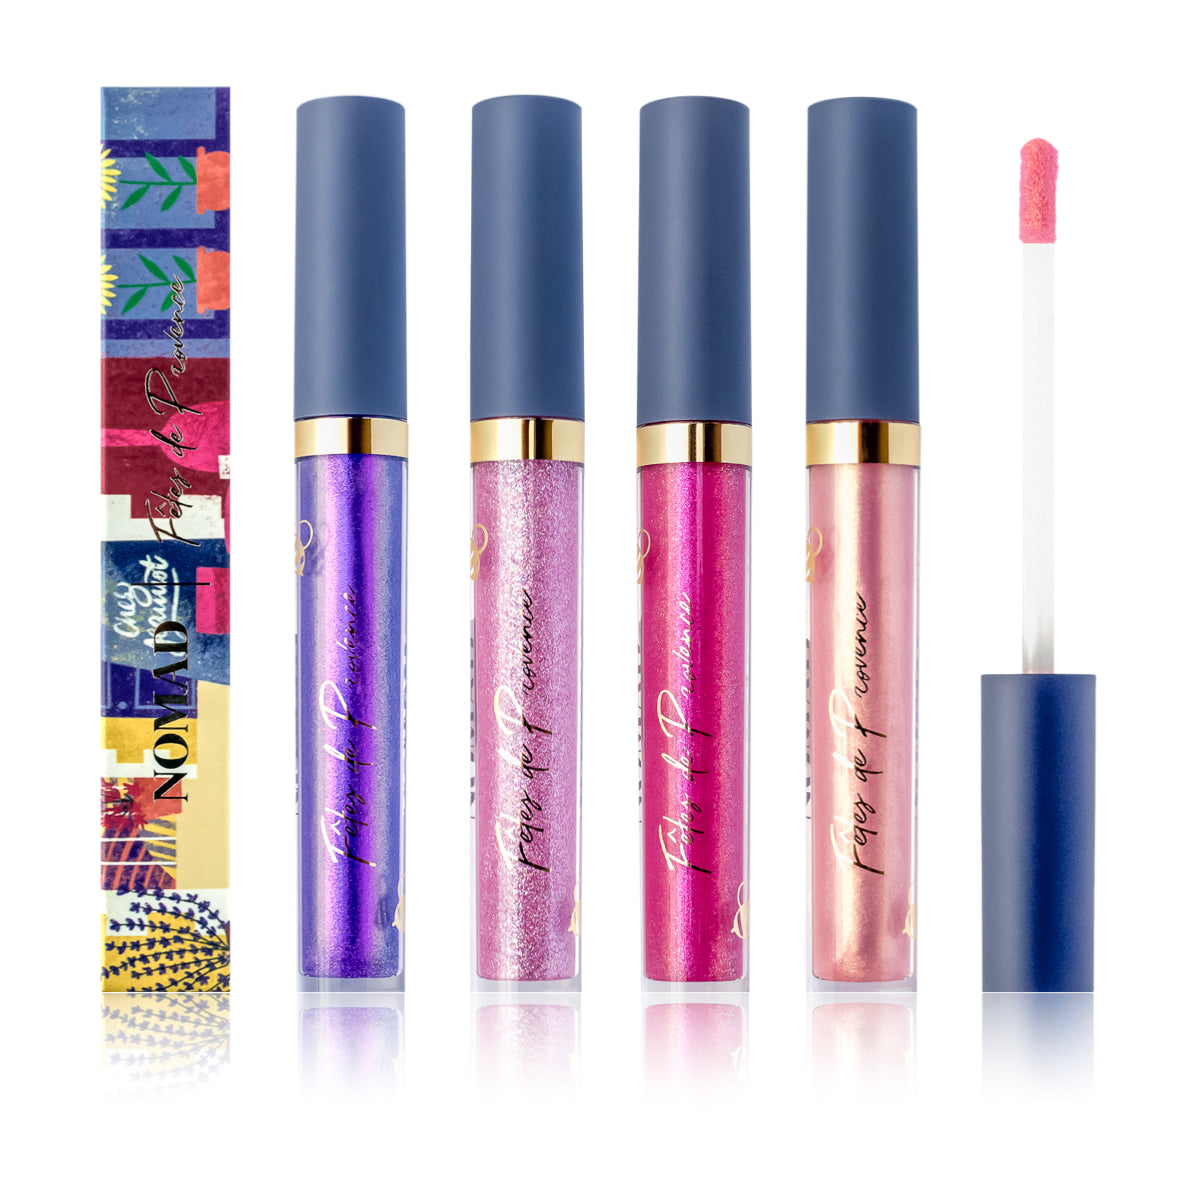 Best glitter lip glosses to add a touch of sparkle